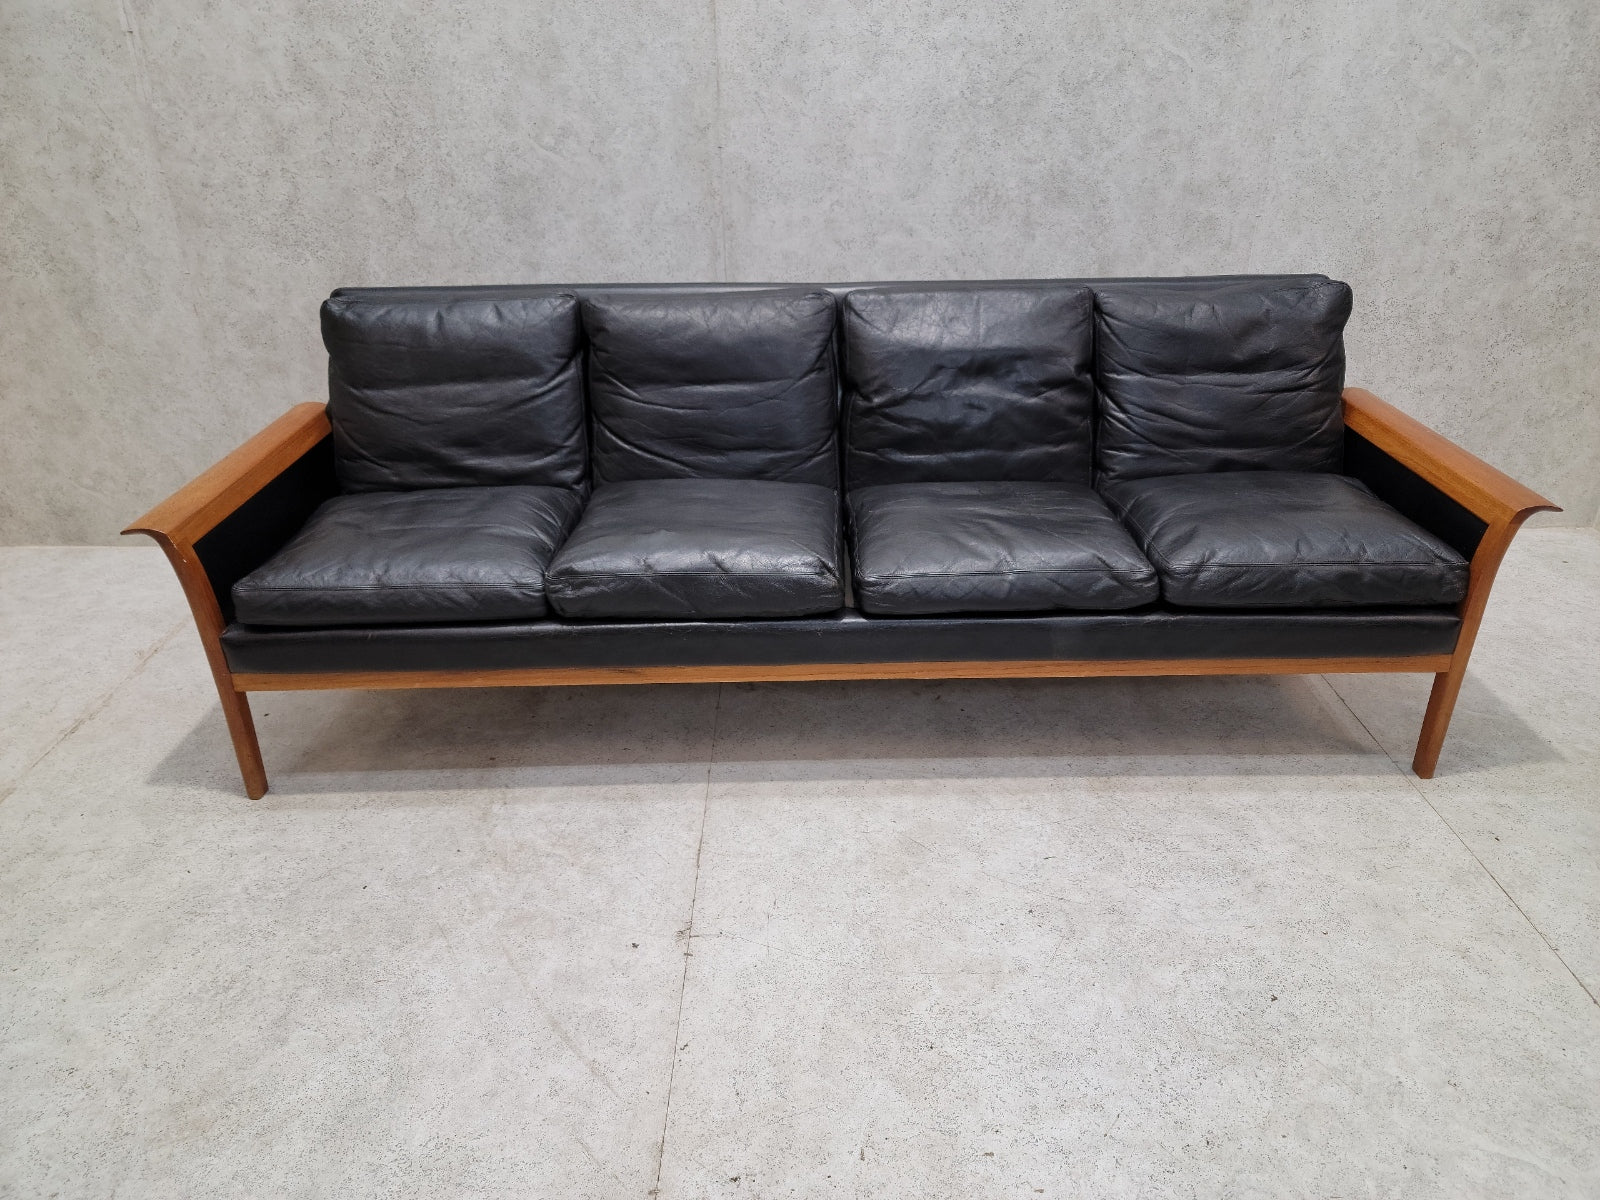 Mid Century Modern Danish Rosewood and Black Leather Sofa Couch Designed By Hans Olsen for Vatne Mobler